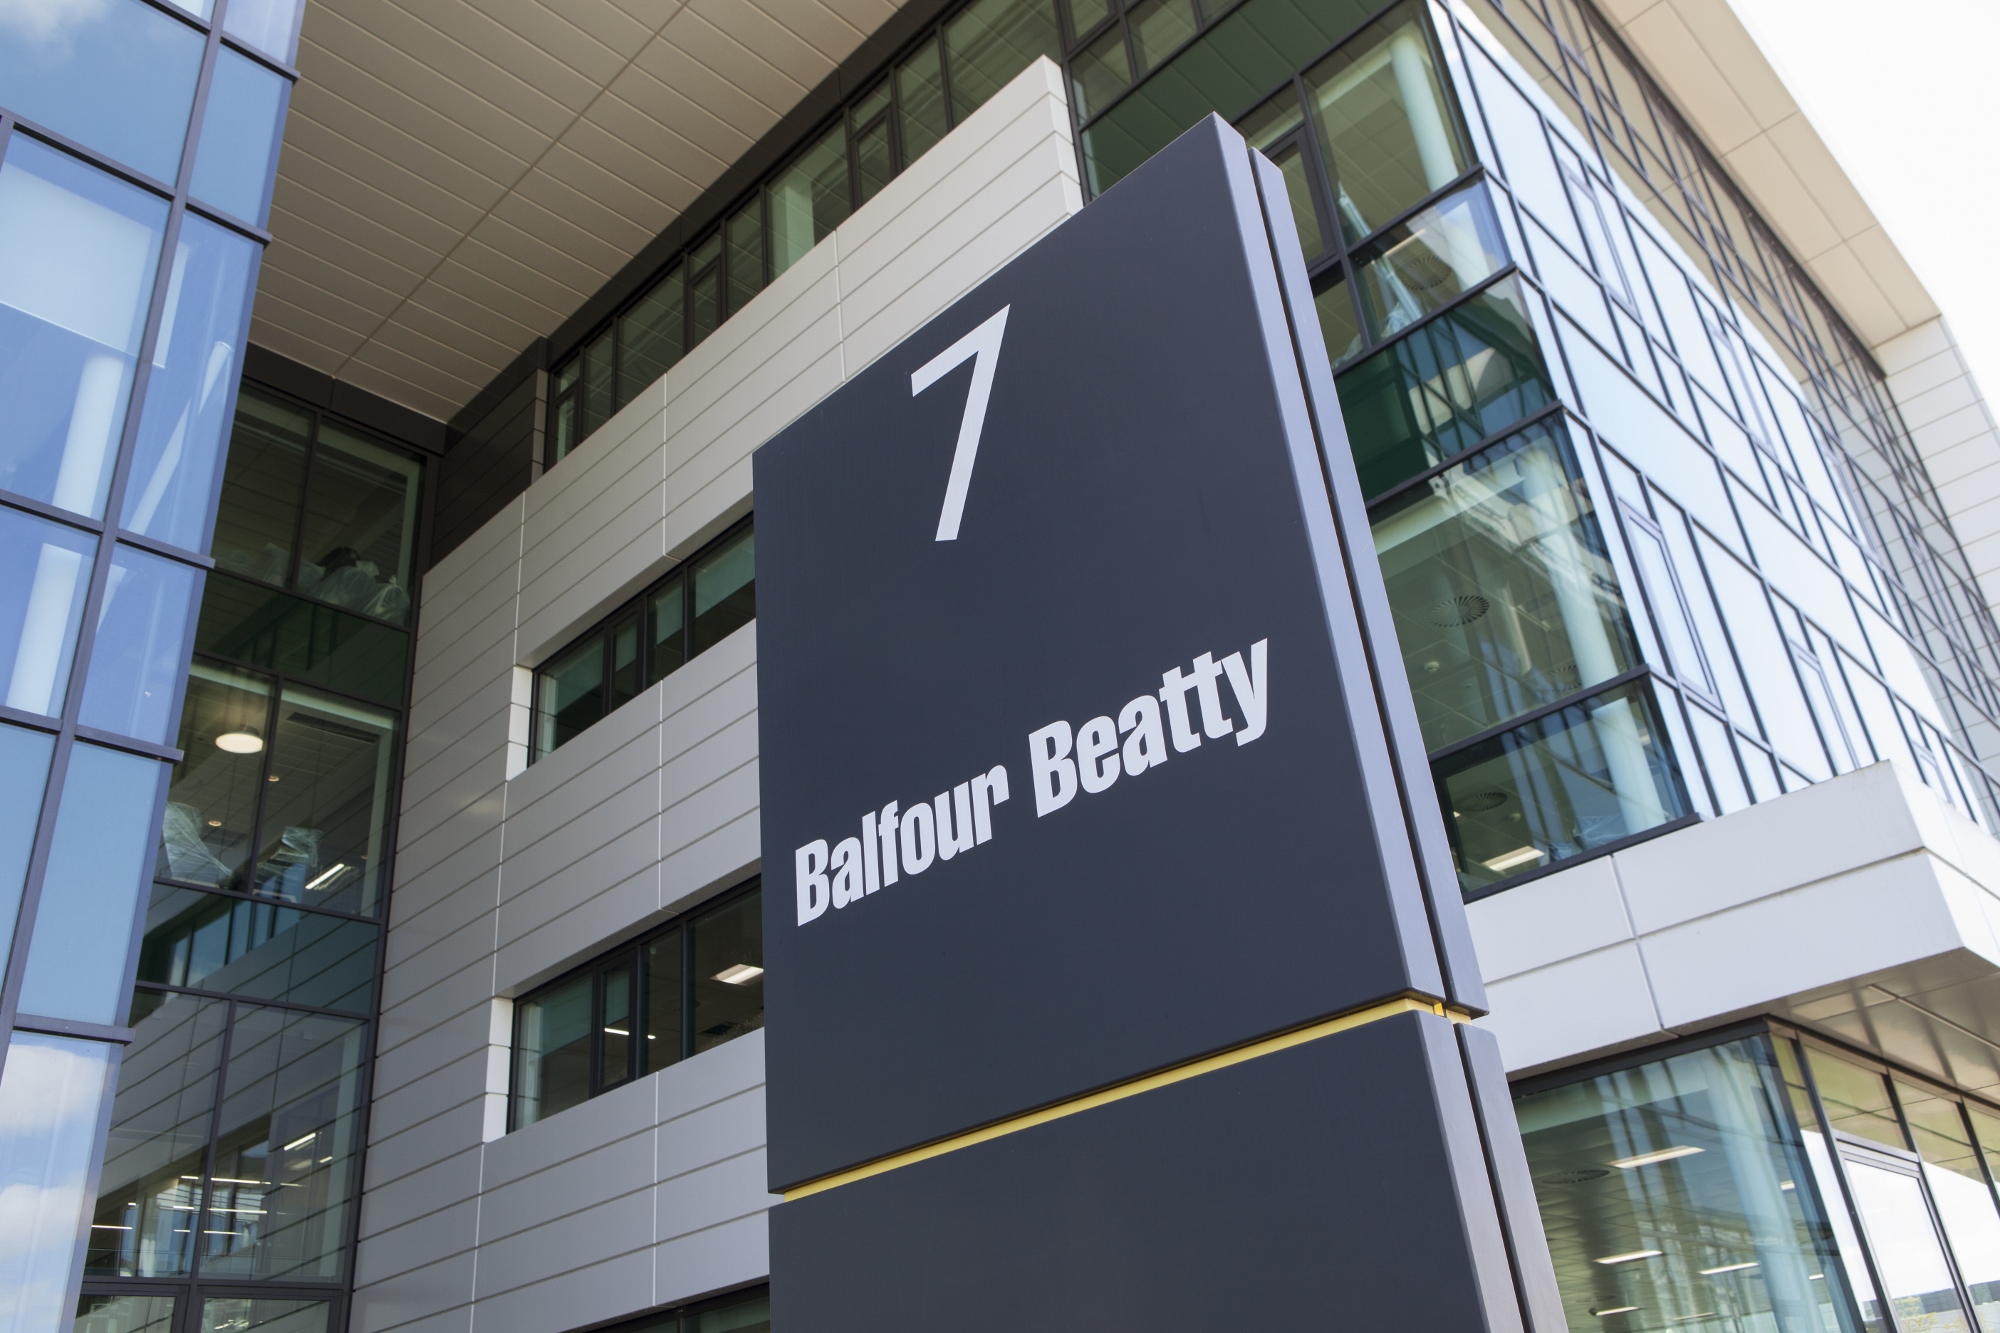 Balfour Beatty board agrees 20% pay cut